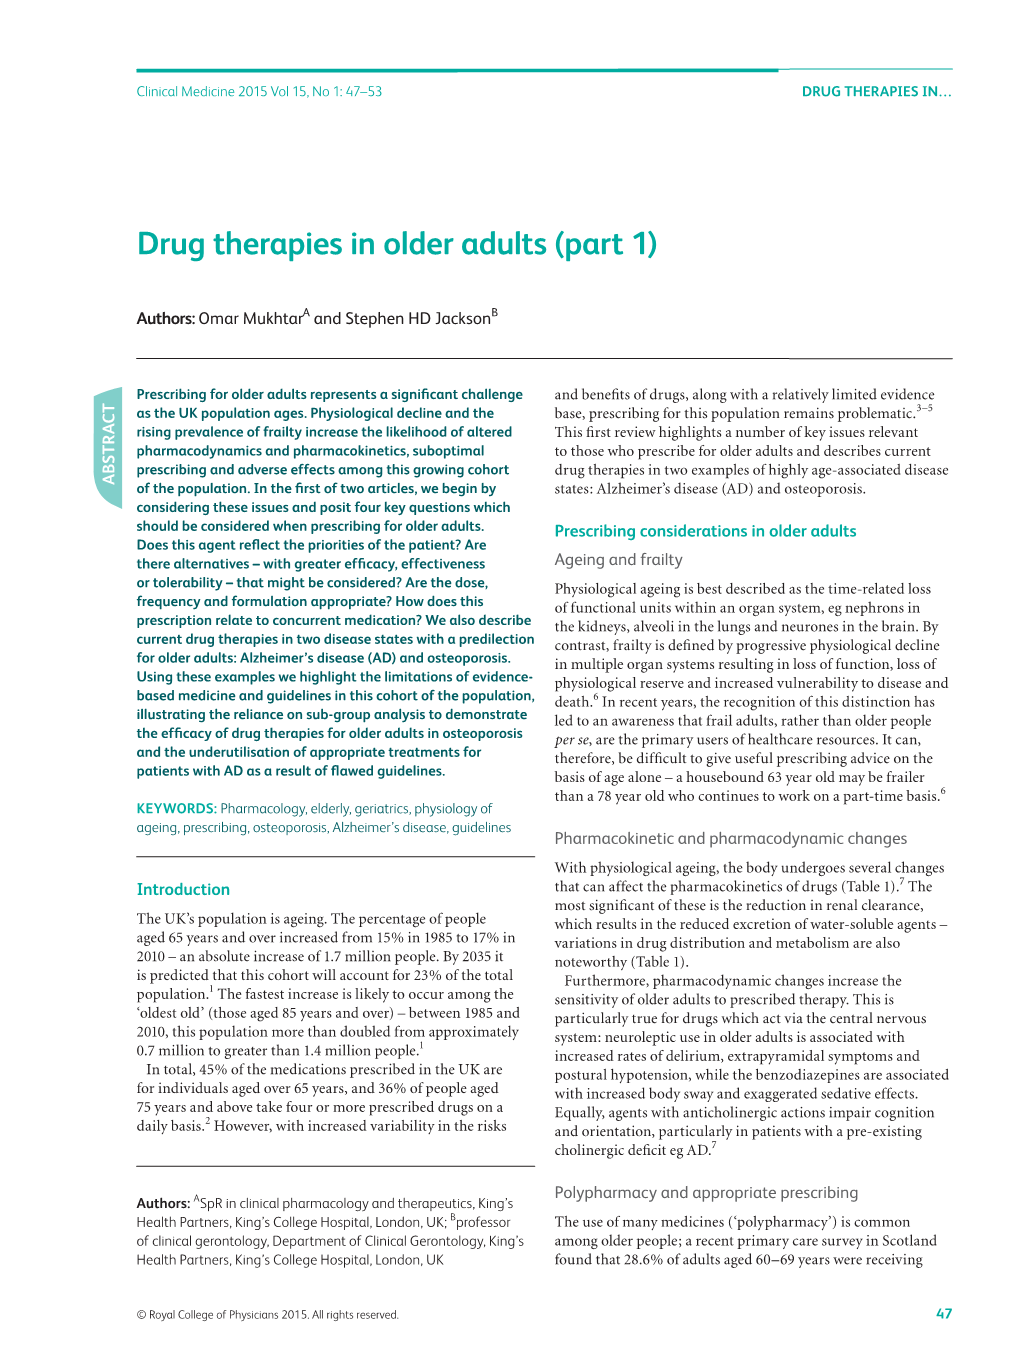 Drug Therapies in Older Adults (Part 1)